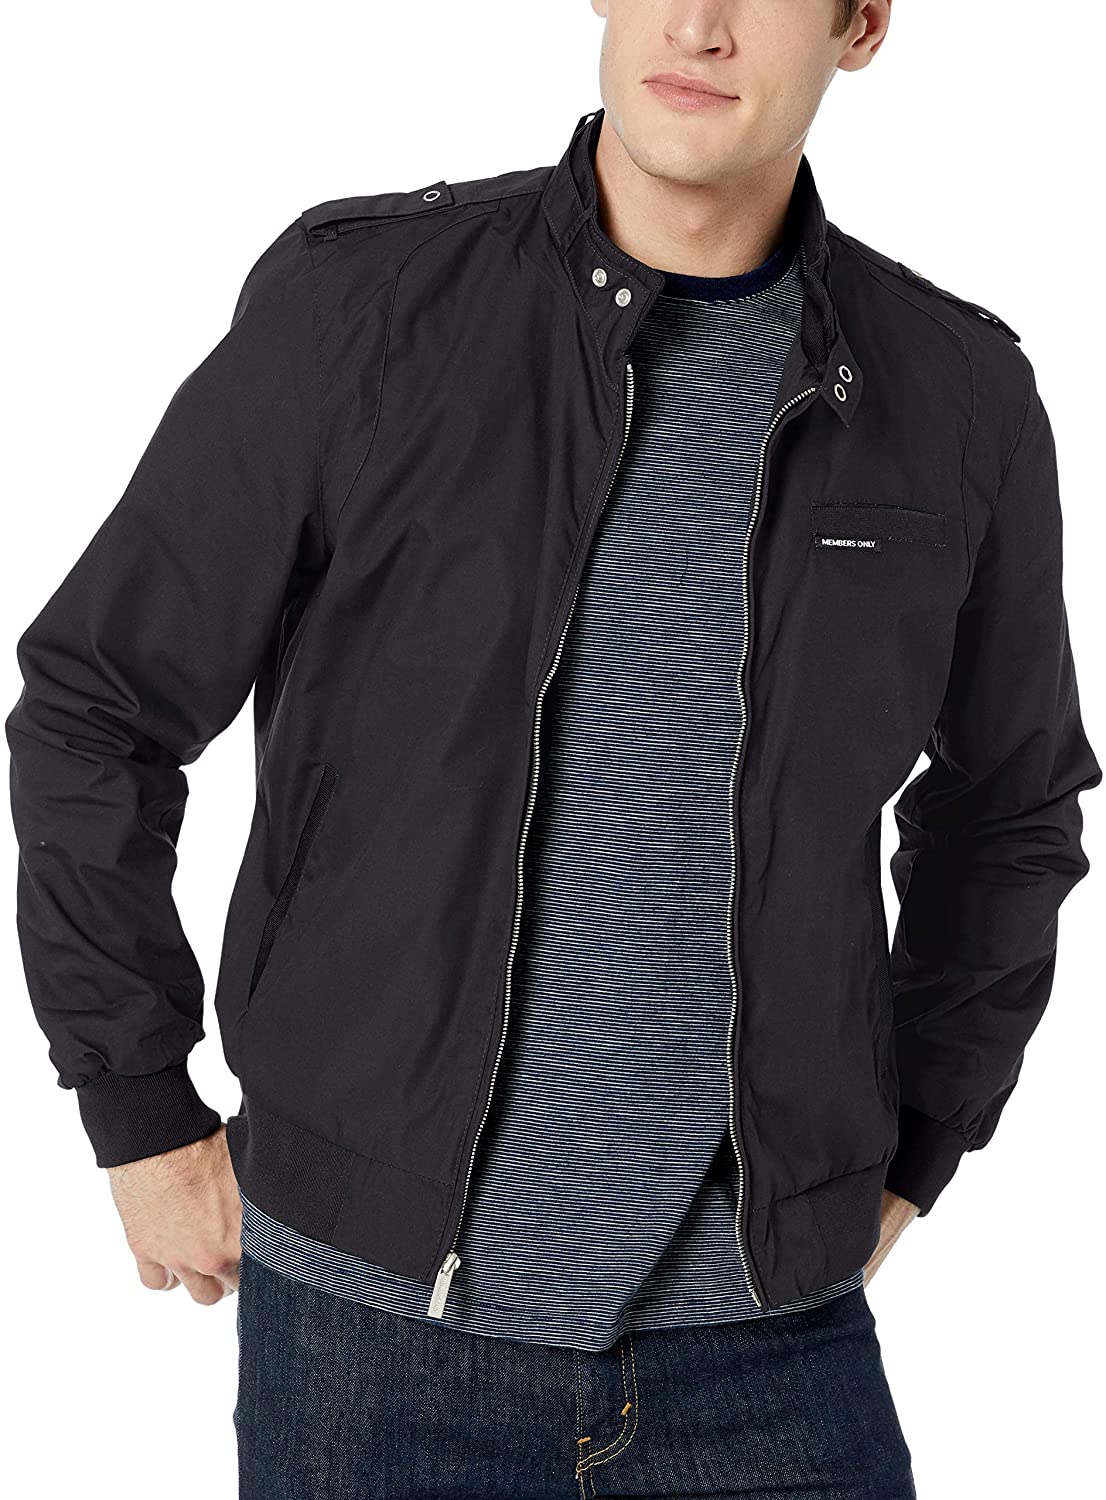 Members Only mens Original Iconic Racer Jacket